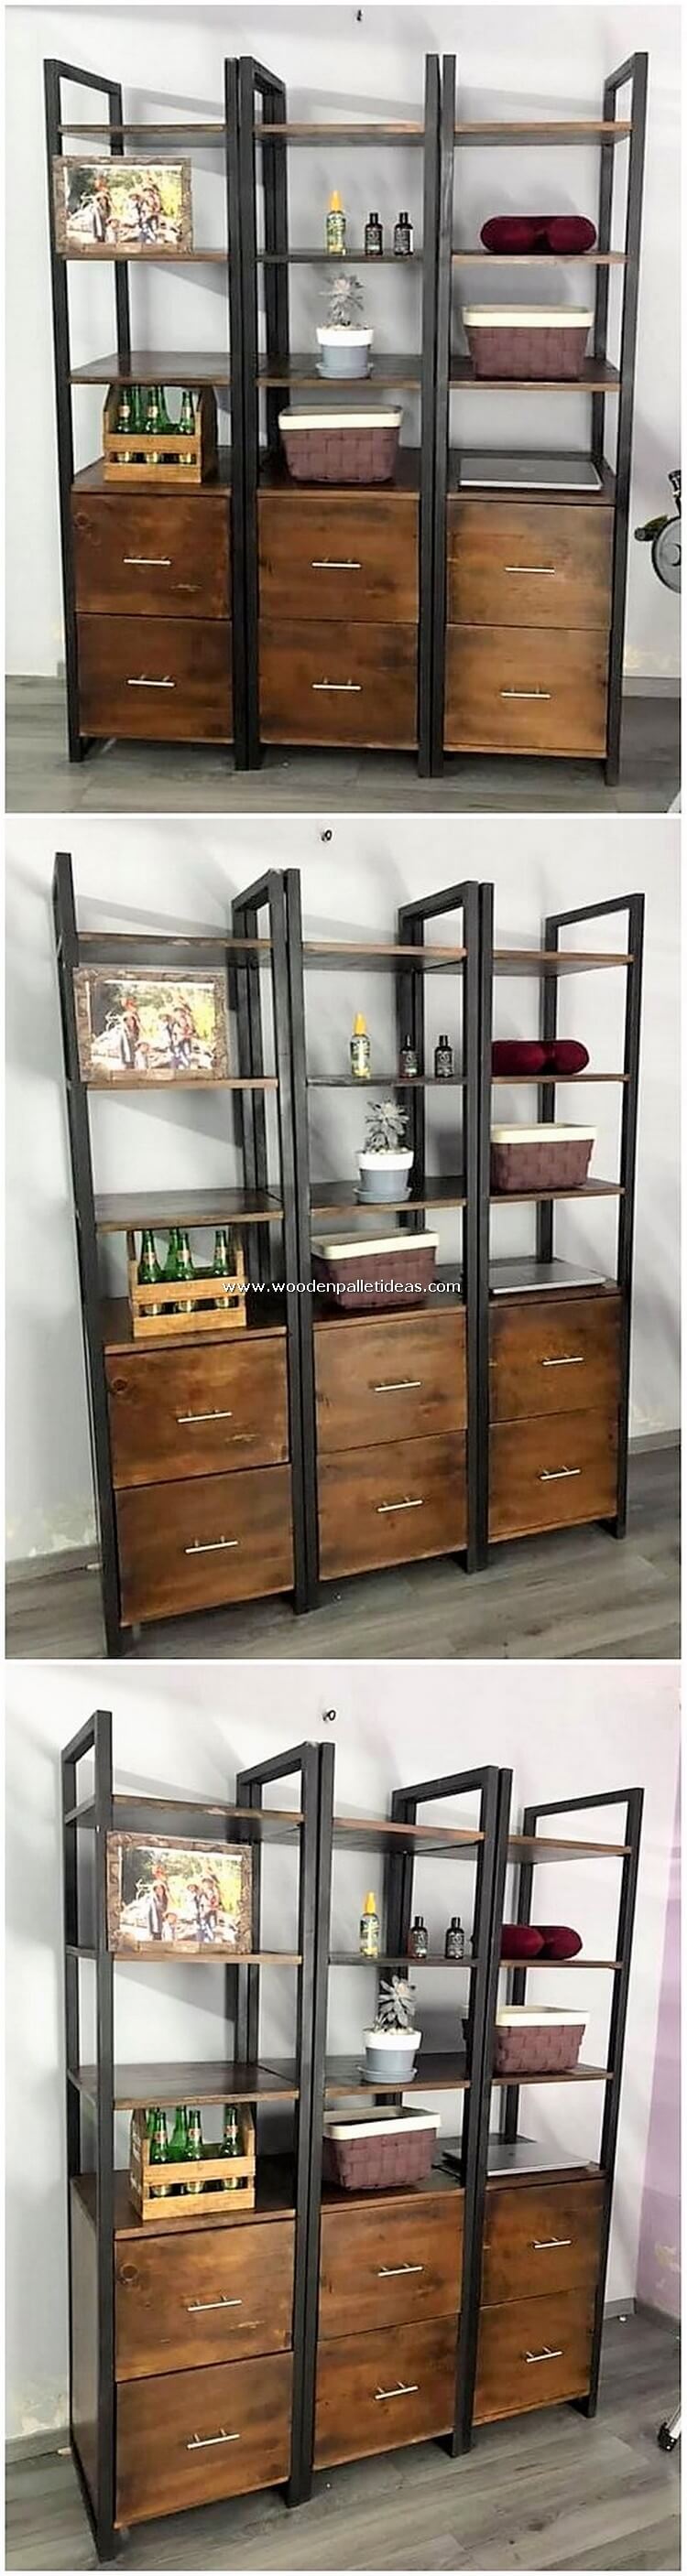 Pallet-Shelving-Unit-with-Cabinet